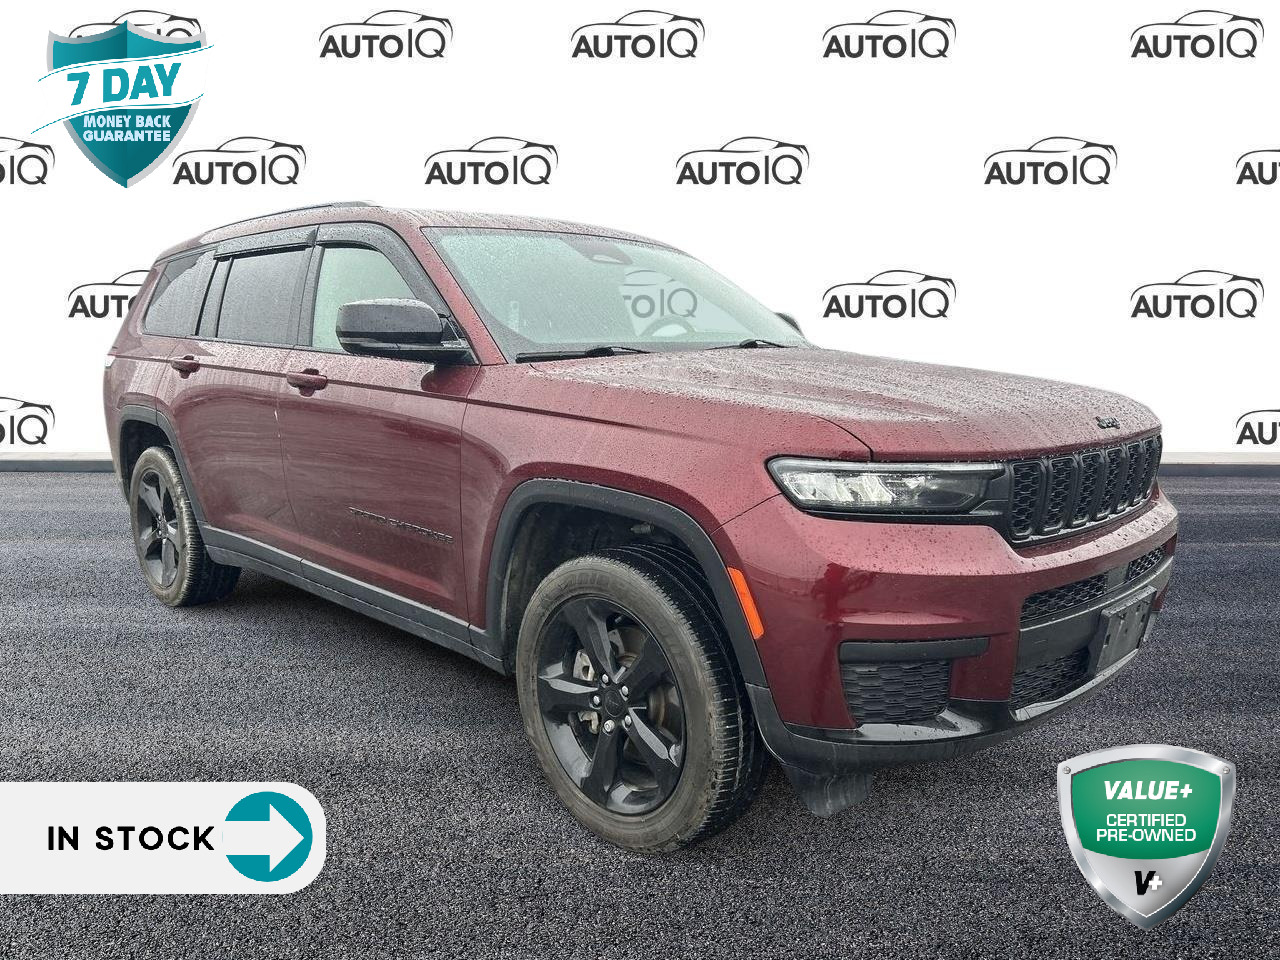 2022 Jeep Grand Cherokee L Laredo APPEARANCE PKG. | UCONNECT5